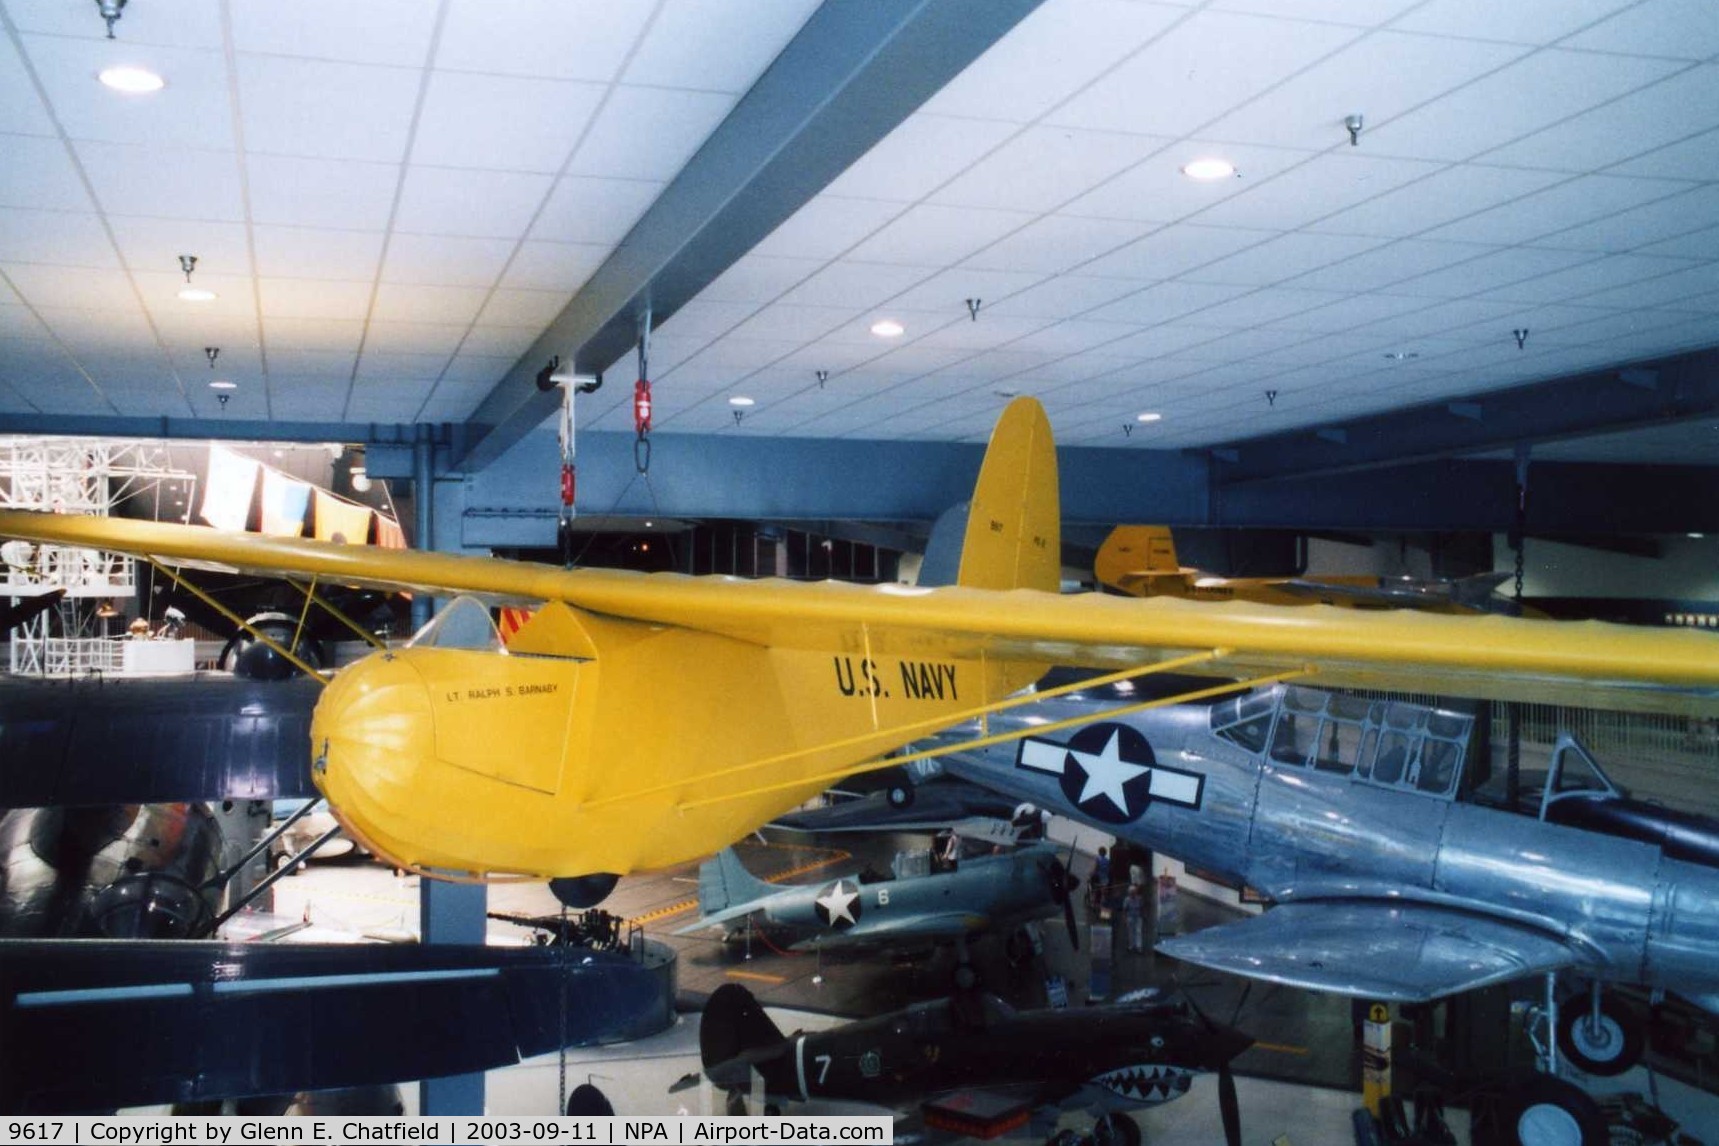 9617, 1934 Franklin PS-2 C/N 126, PS-2 training glider at the National Museum of Naval Aviation